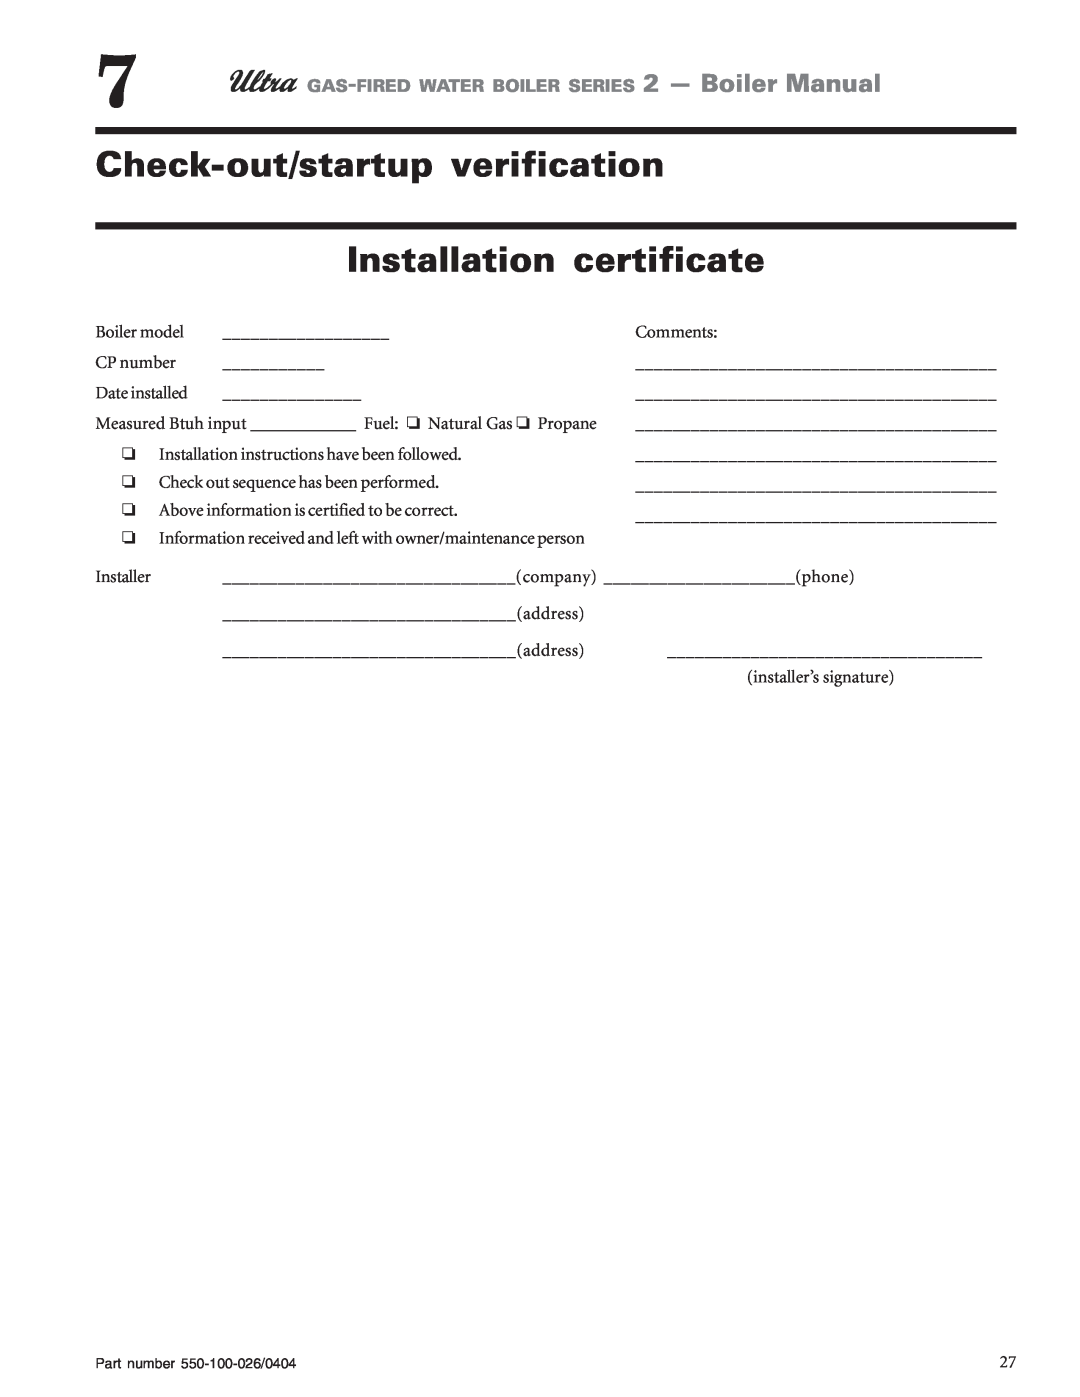 Ultra electronic 155, 105, 80, 230 & -310 manual Installation certificate, Check-out/startupverification 